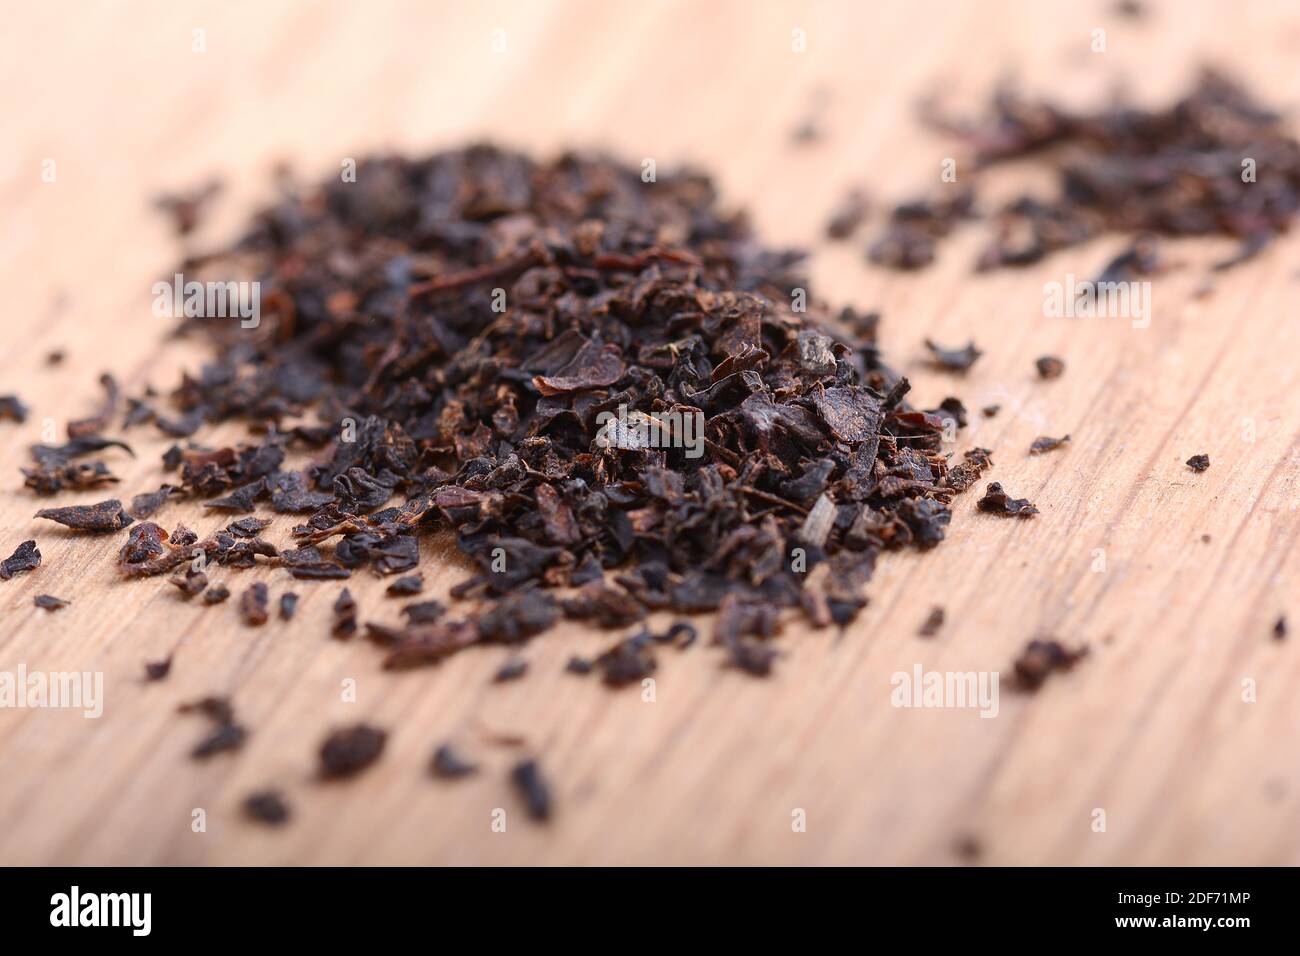 Earl grey black dry tea leaves on wooden plate close up Stock Photo